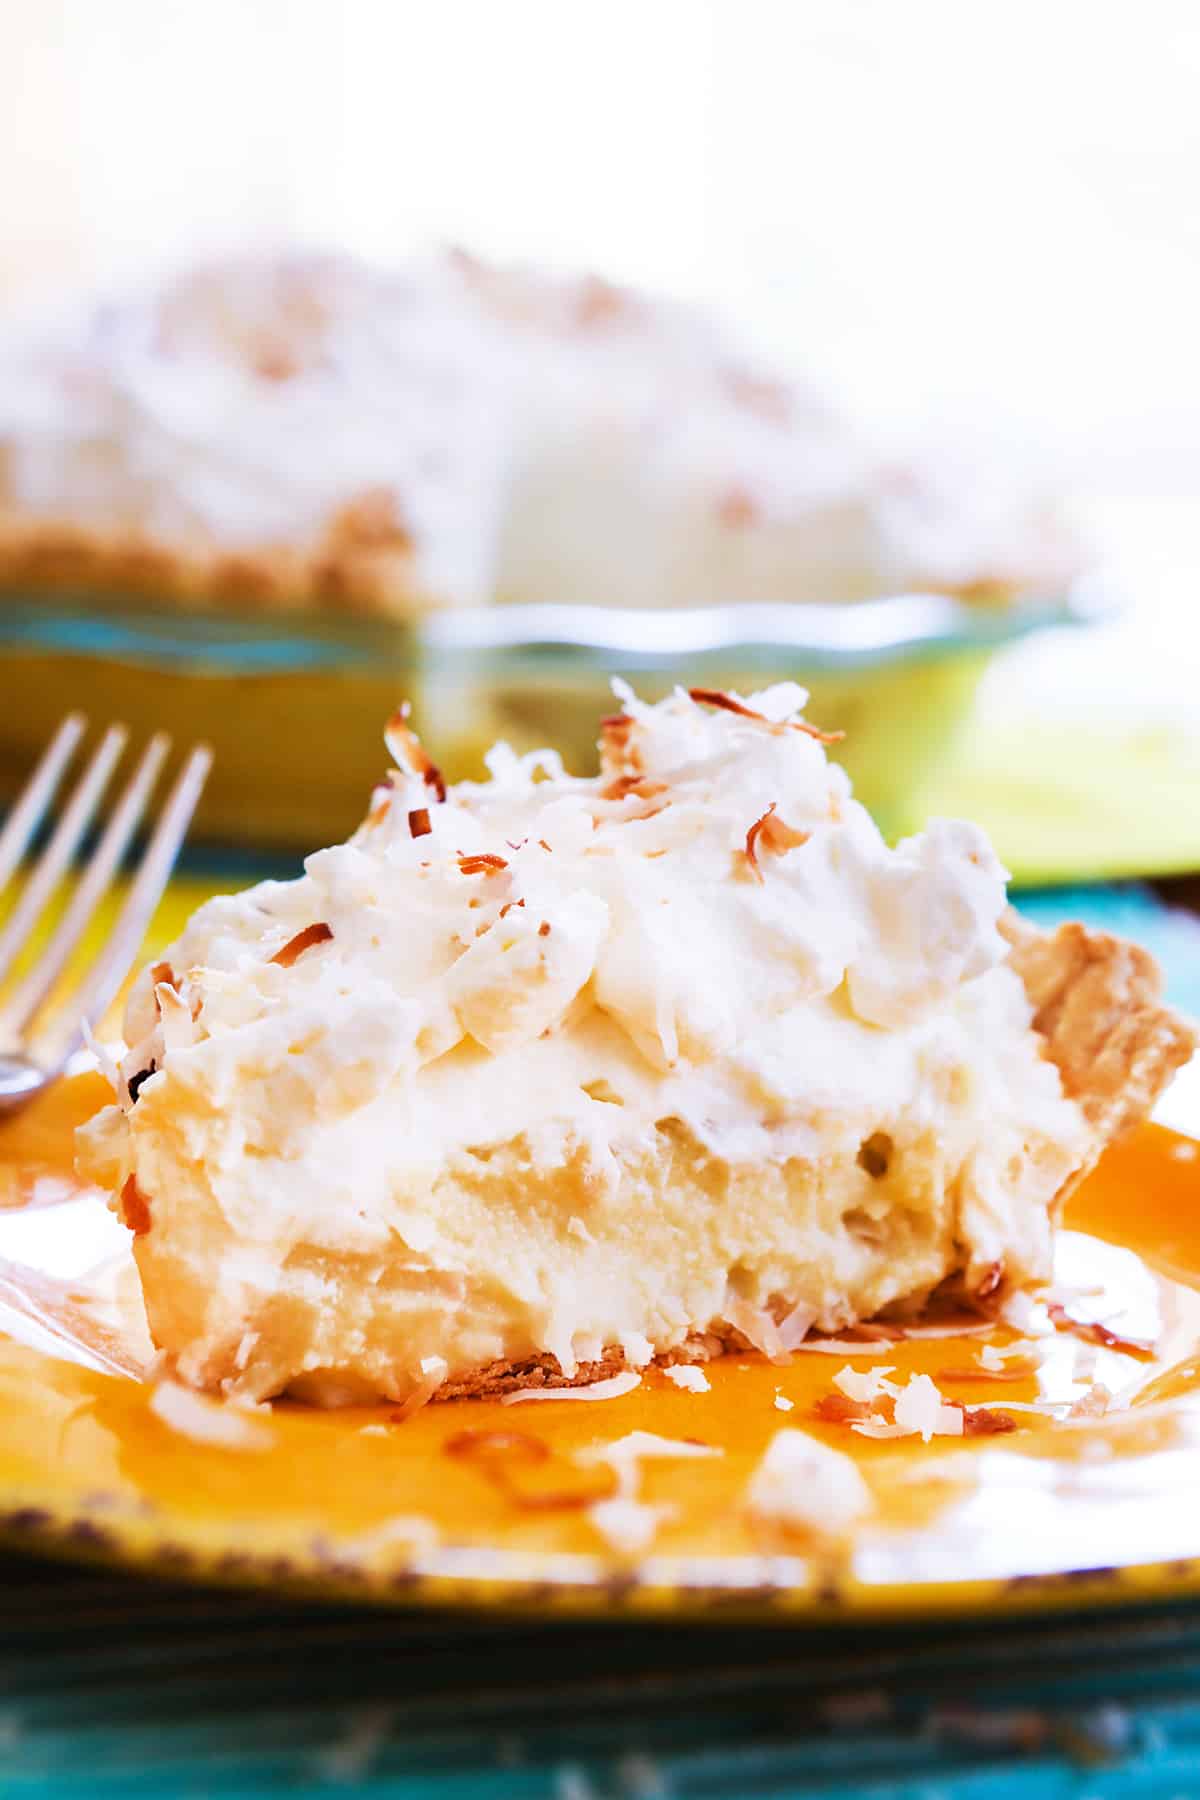 A slice of coconut cream pie on a yellow plate.